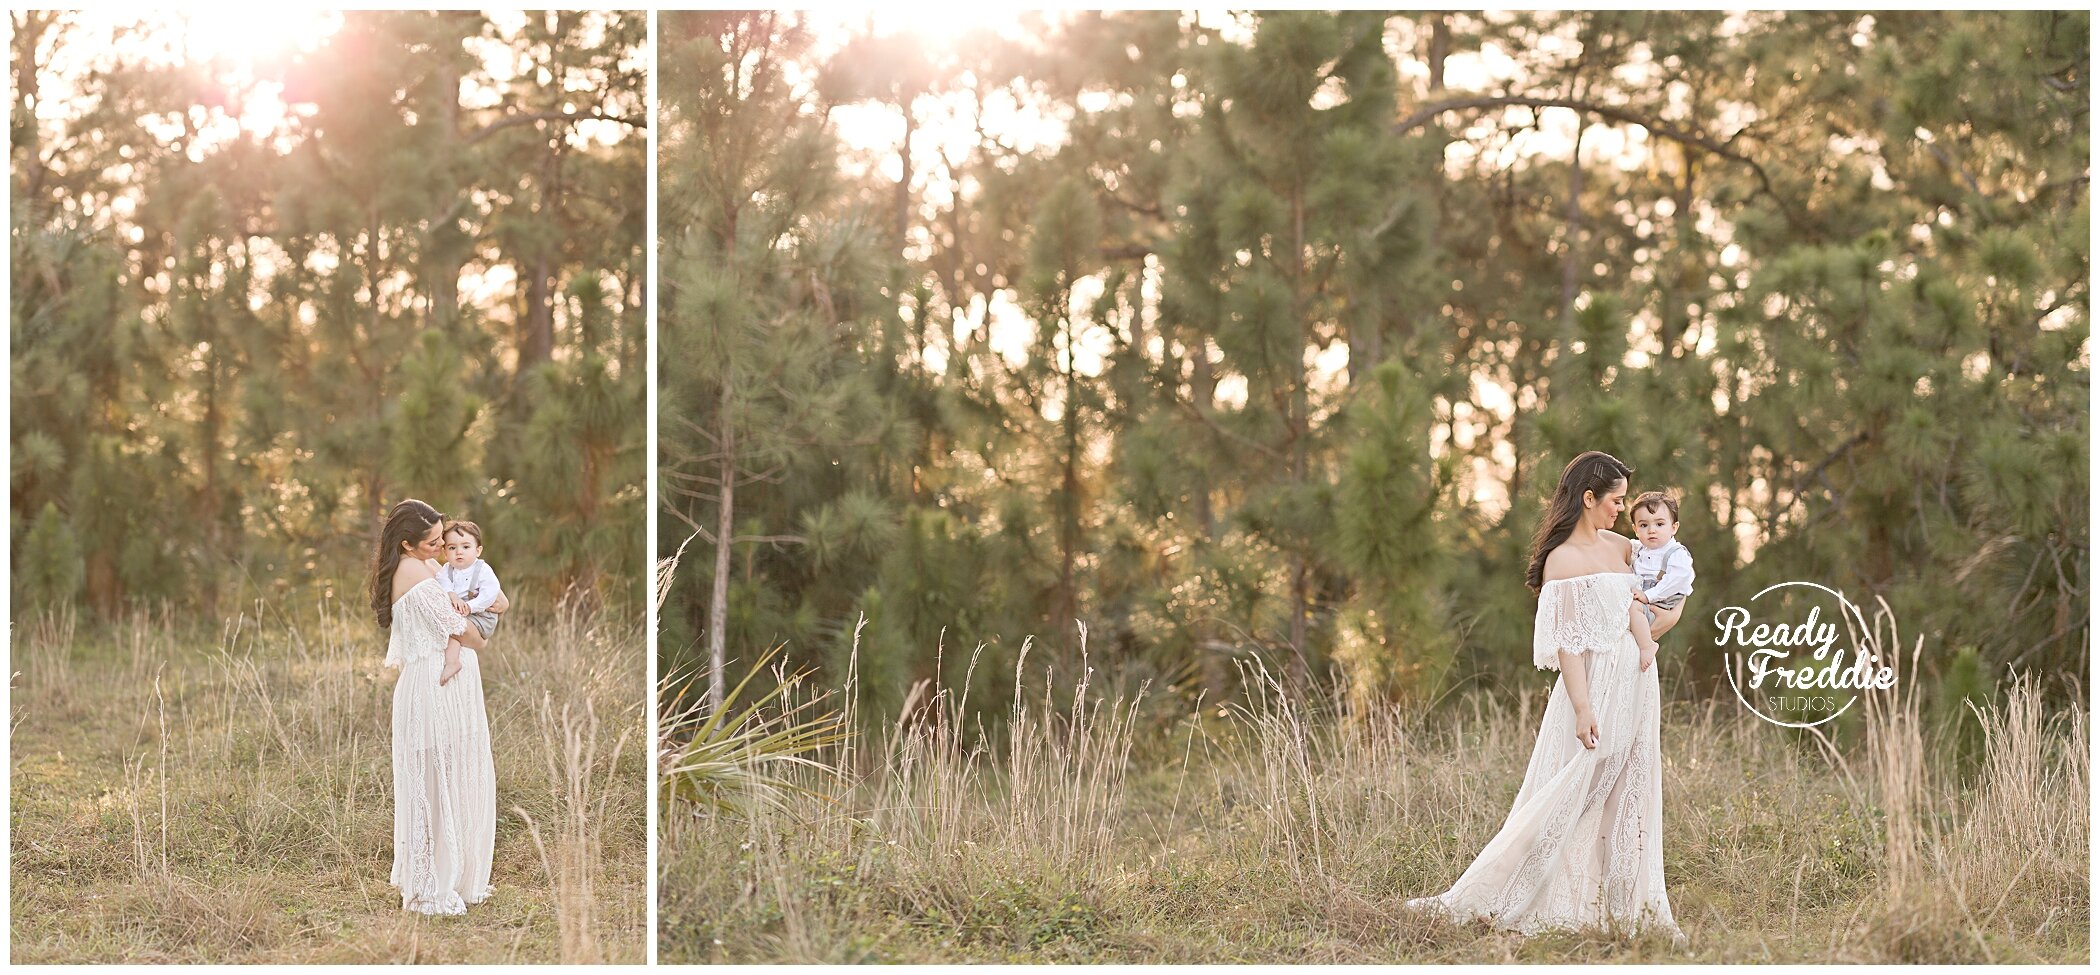 Motherhood Portrait in the Field during Sunset | Mommy and Me | Ready Freddie Studios | Miami, FL